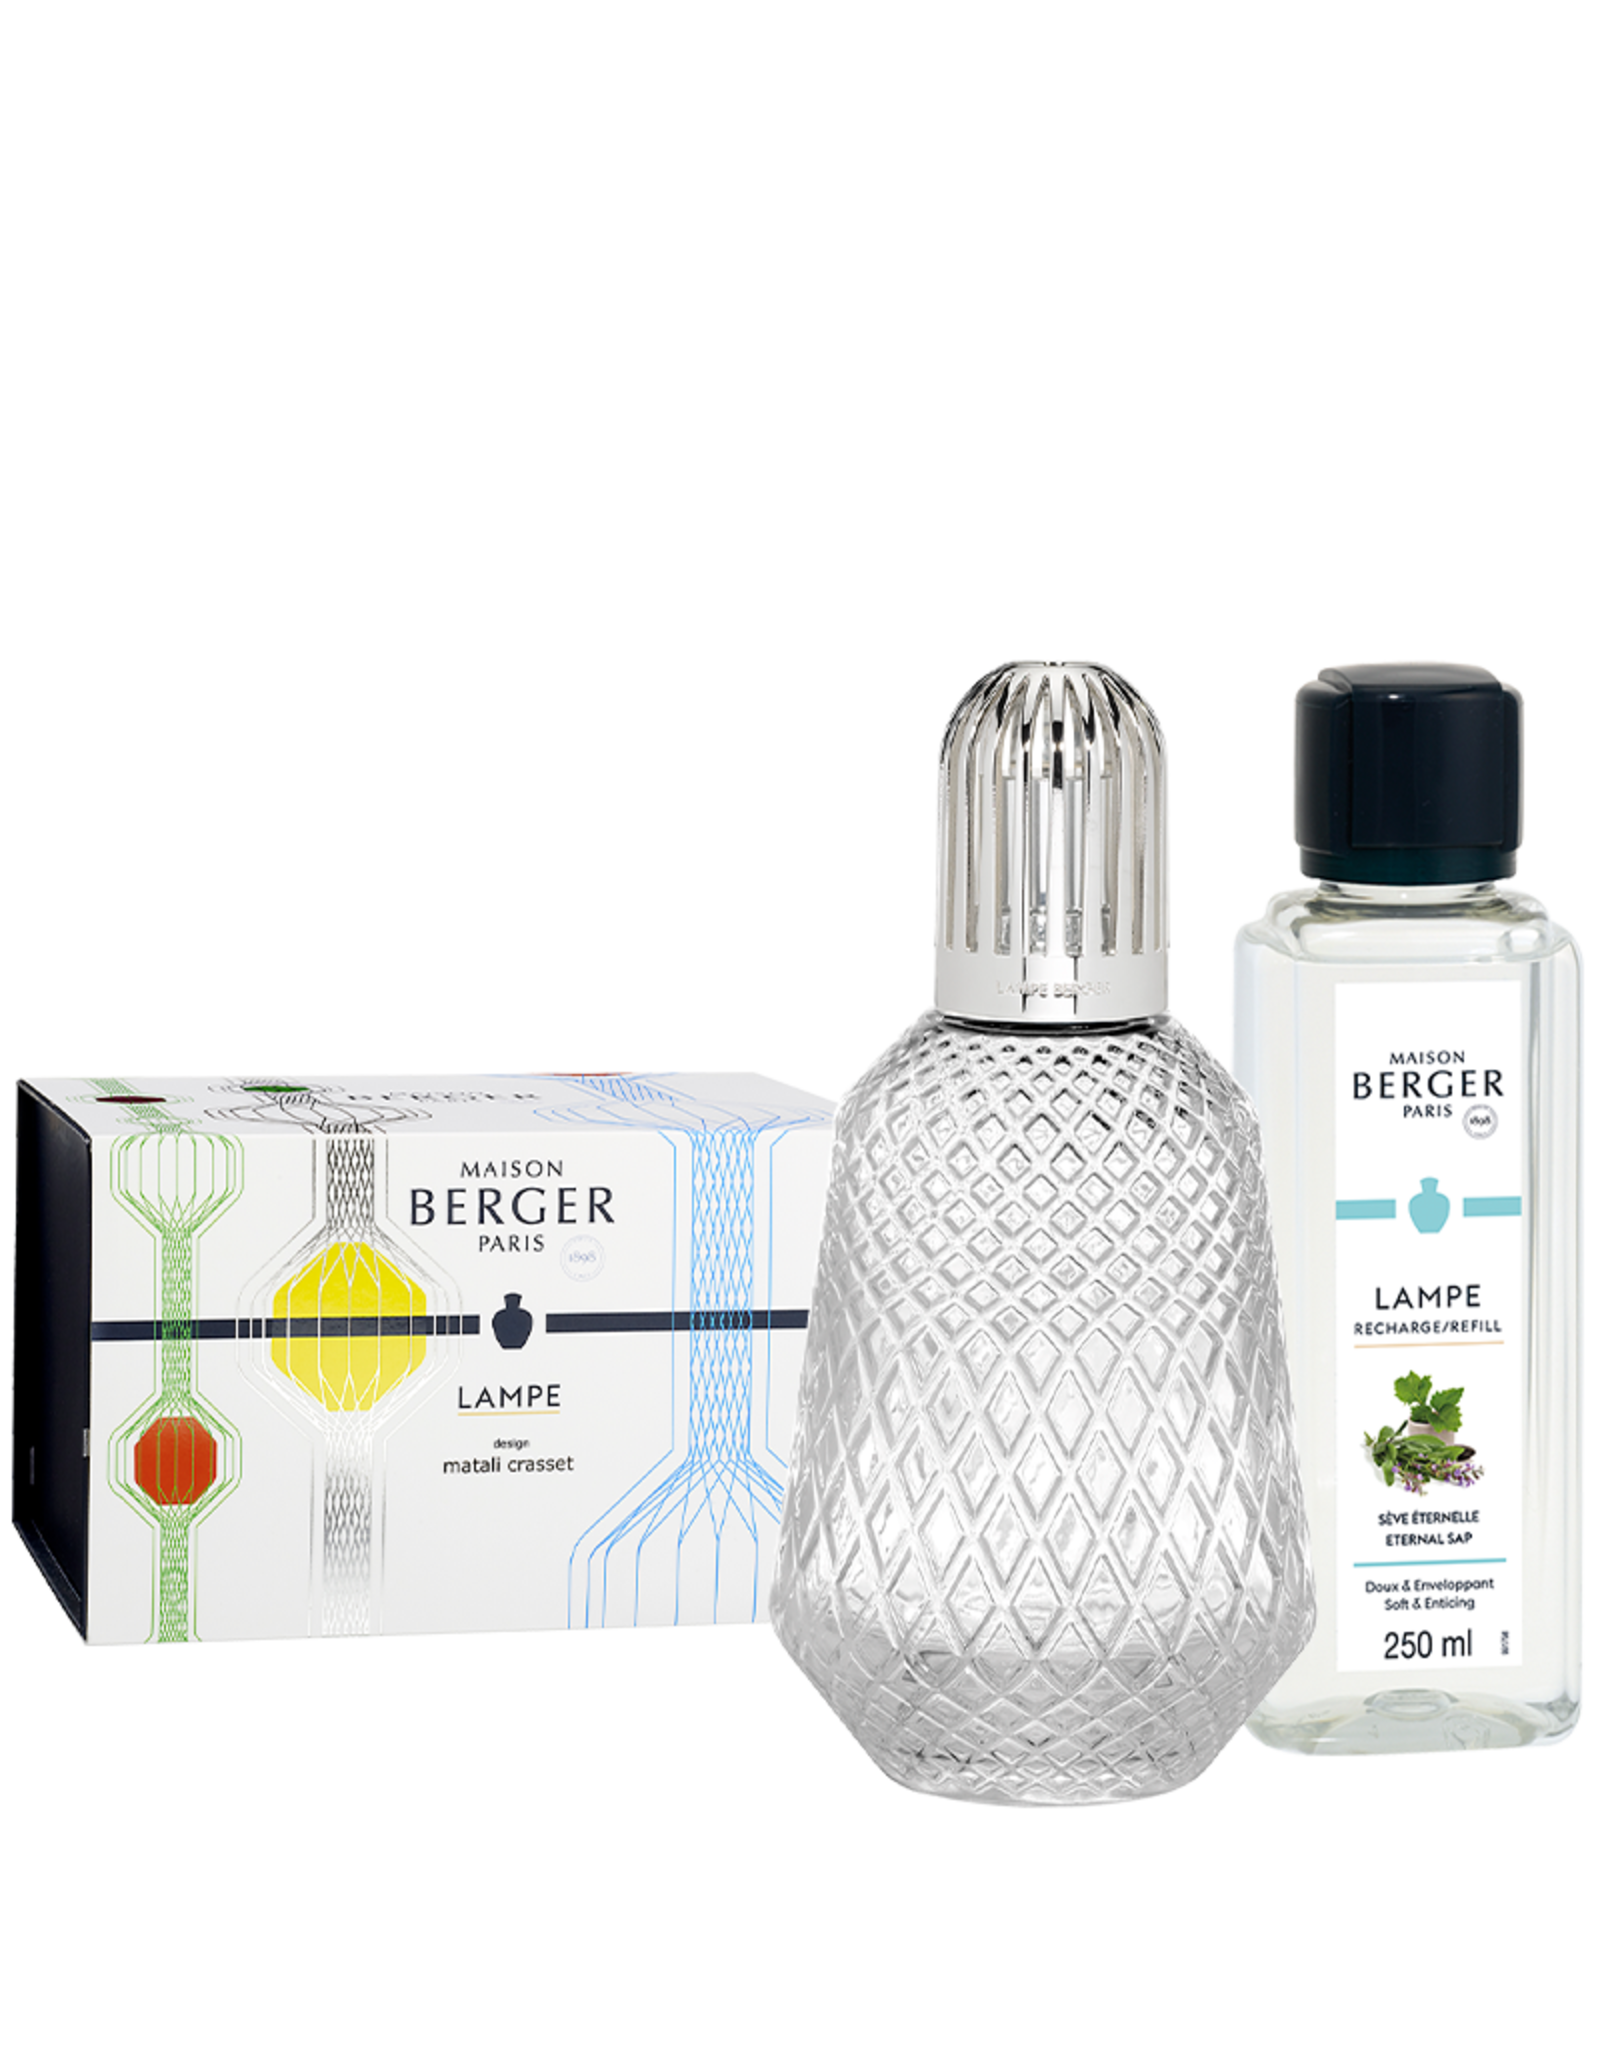 vlam mager Geroosterd Lampe Berger Fragrance Lamp Matali Crasset Gift Set Clear Maison Berger -  Digs N Gifts